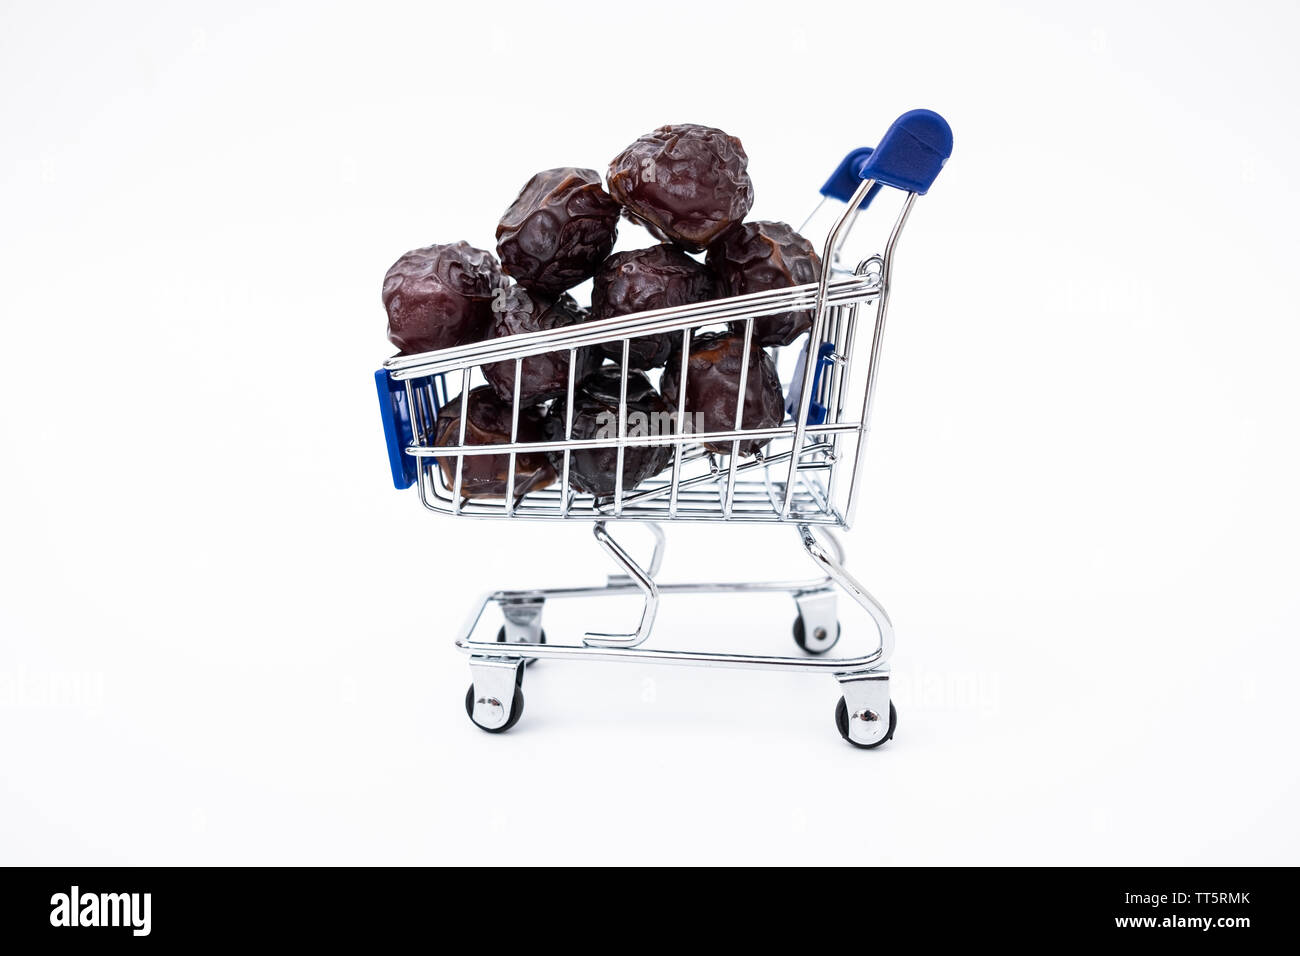 Dates fruit in market cart, concept of stocks, price or date fruit trade Stock Photo